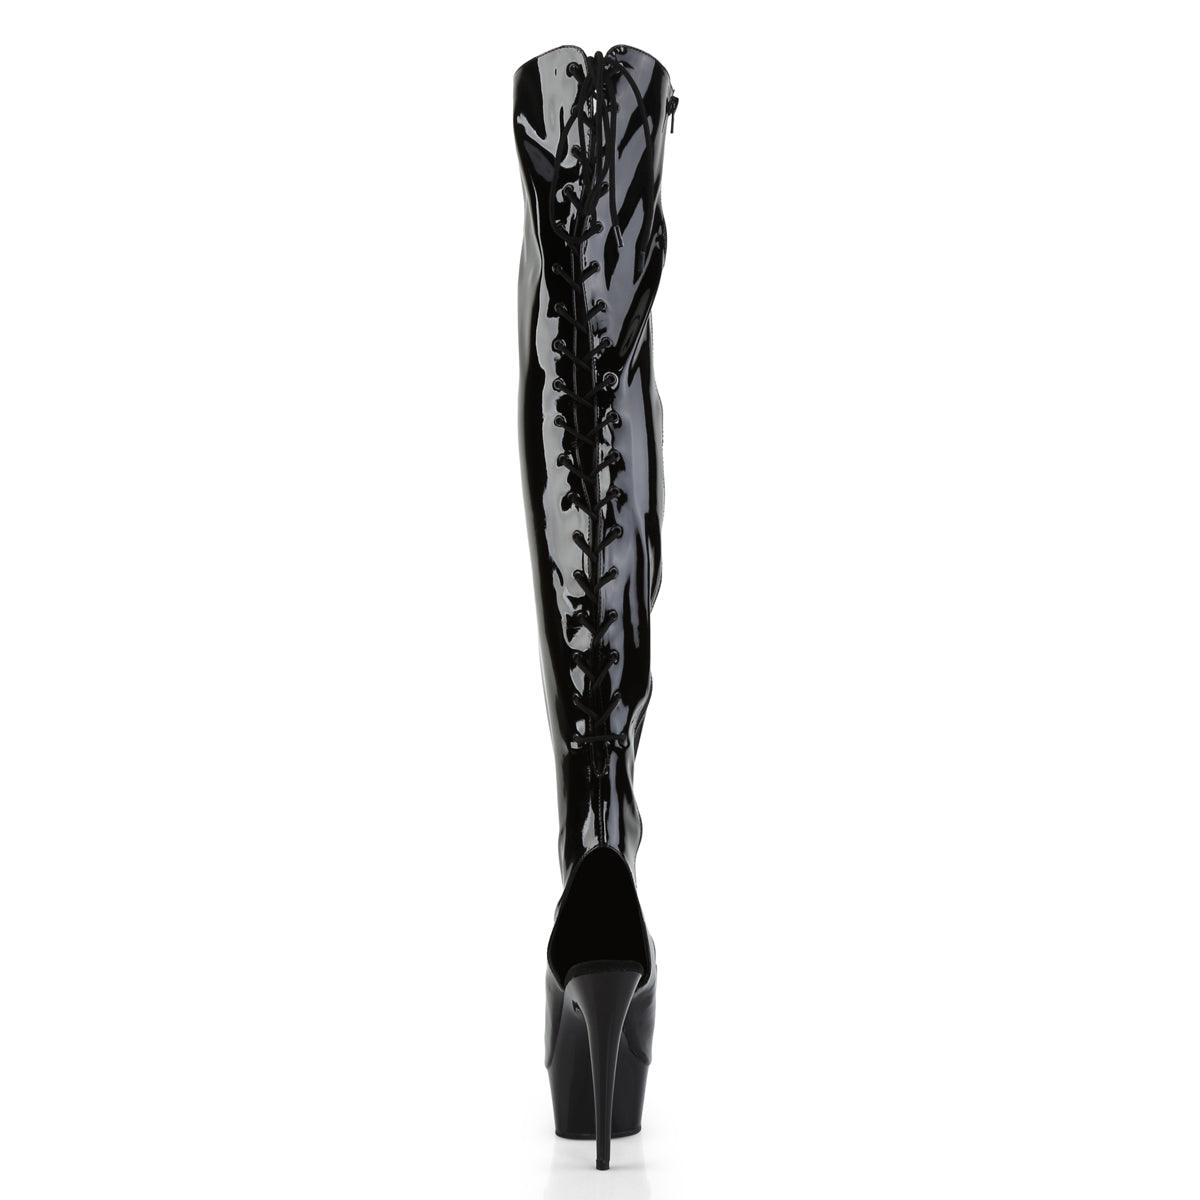 DELIGHT-3017 6" Heel Black Stretch Patent Pole Dancer Boots-Pleaser- Sexy Shoes Fetish Footwear